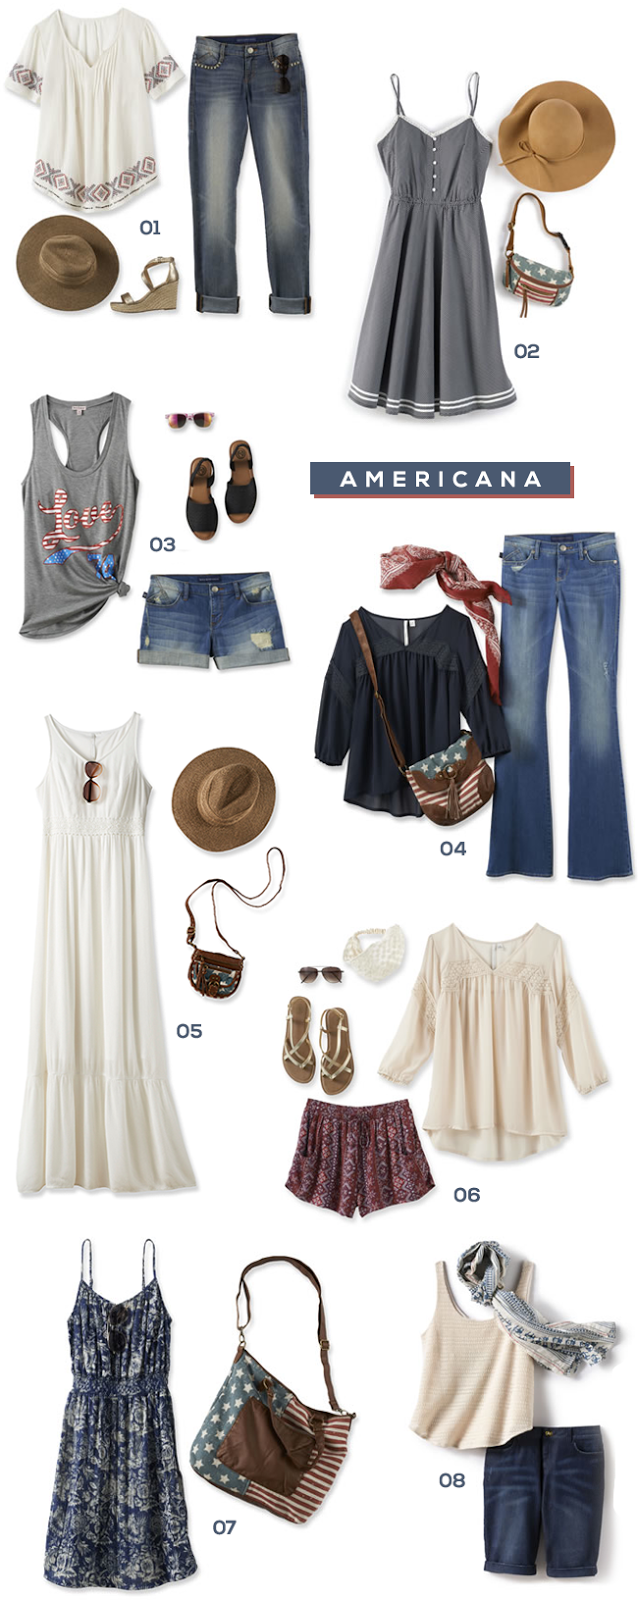 Summer Style Trend: Americana (via Bubby and Bean)